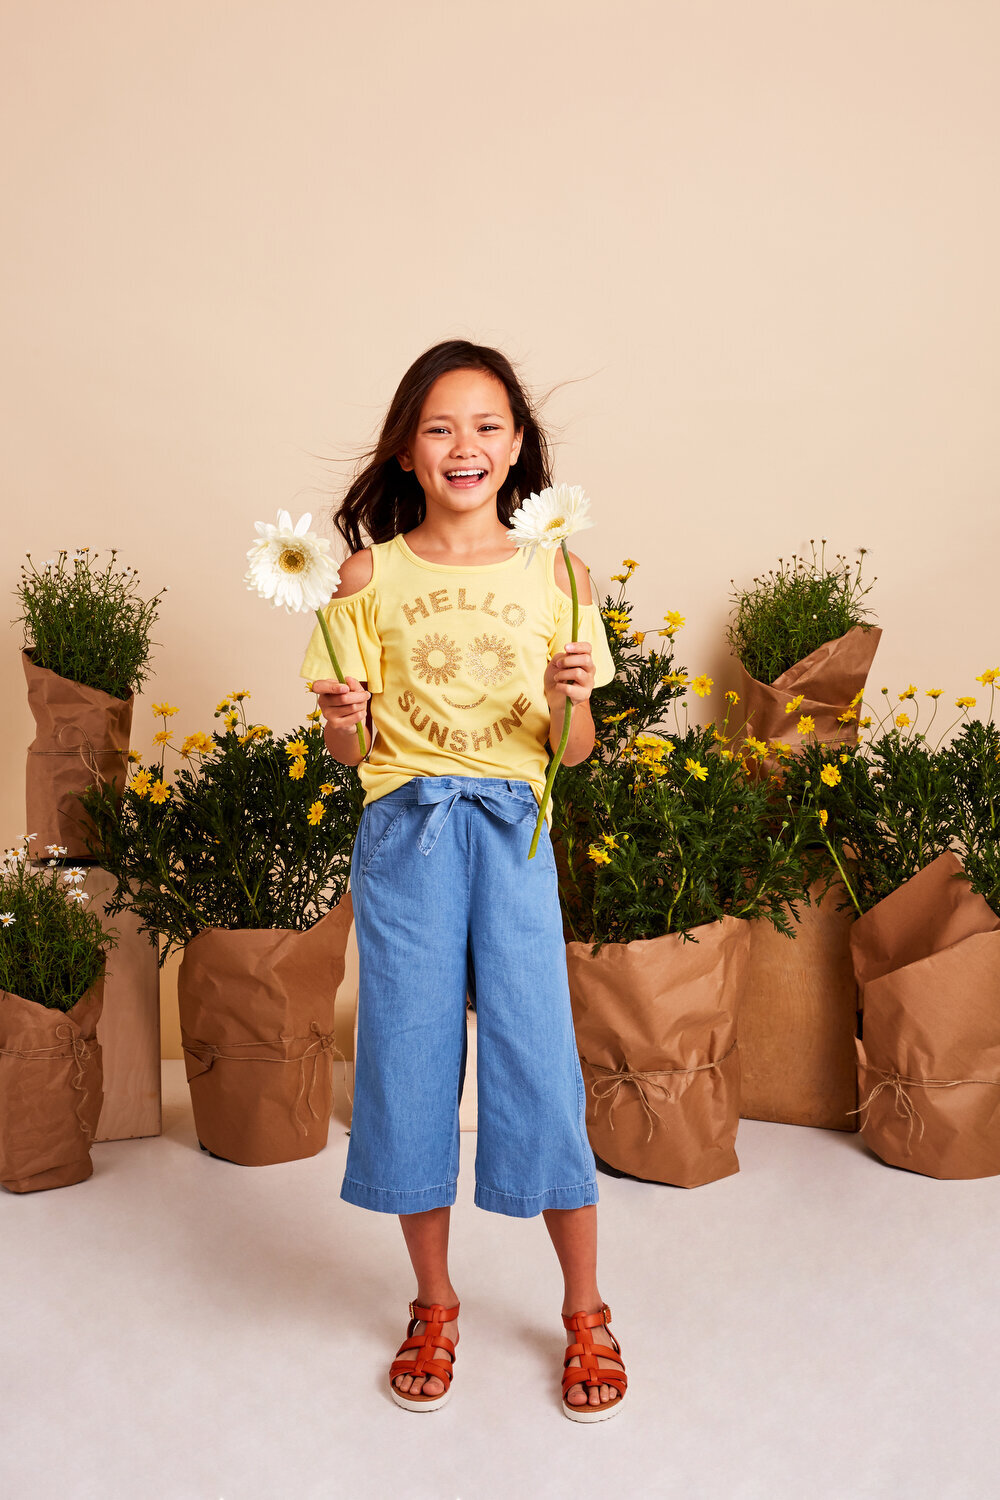 Greer Rivera Photography Kids Editorial Photoshoots Marin CA Girl holding flowers and smiling